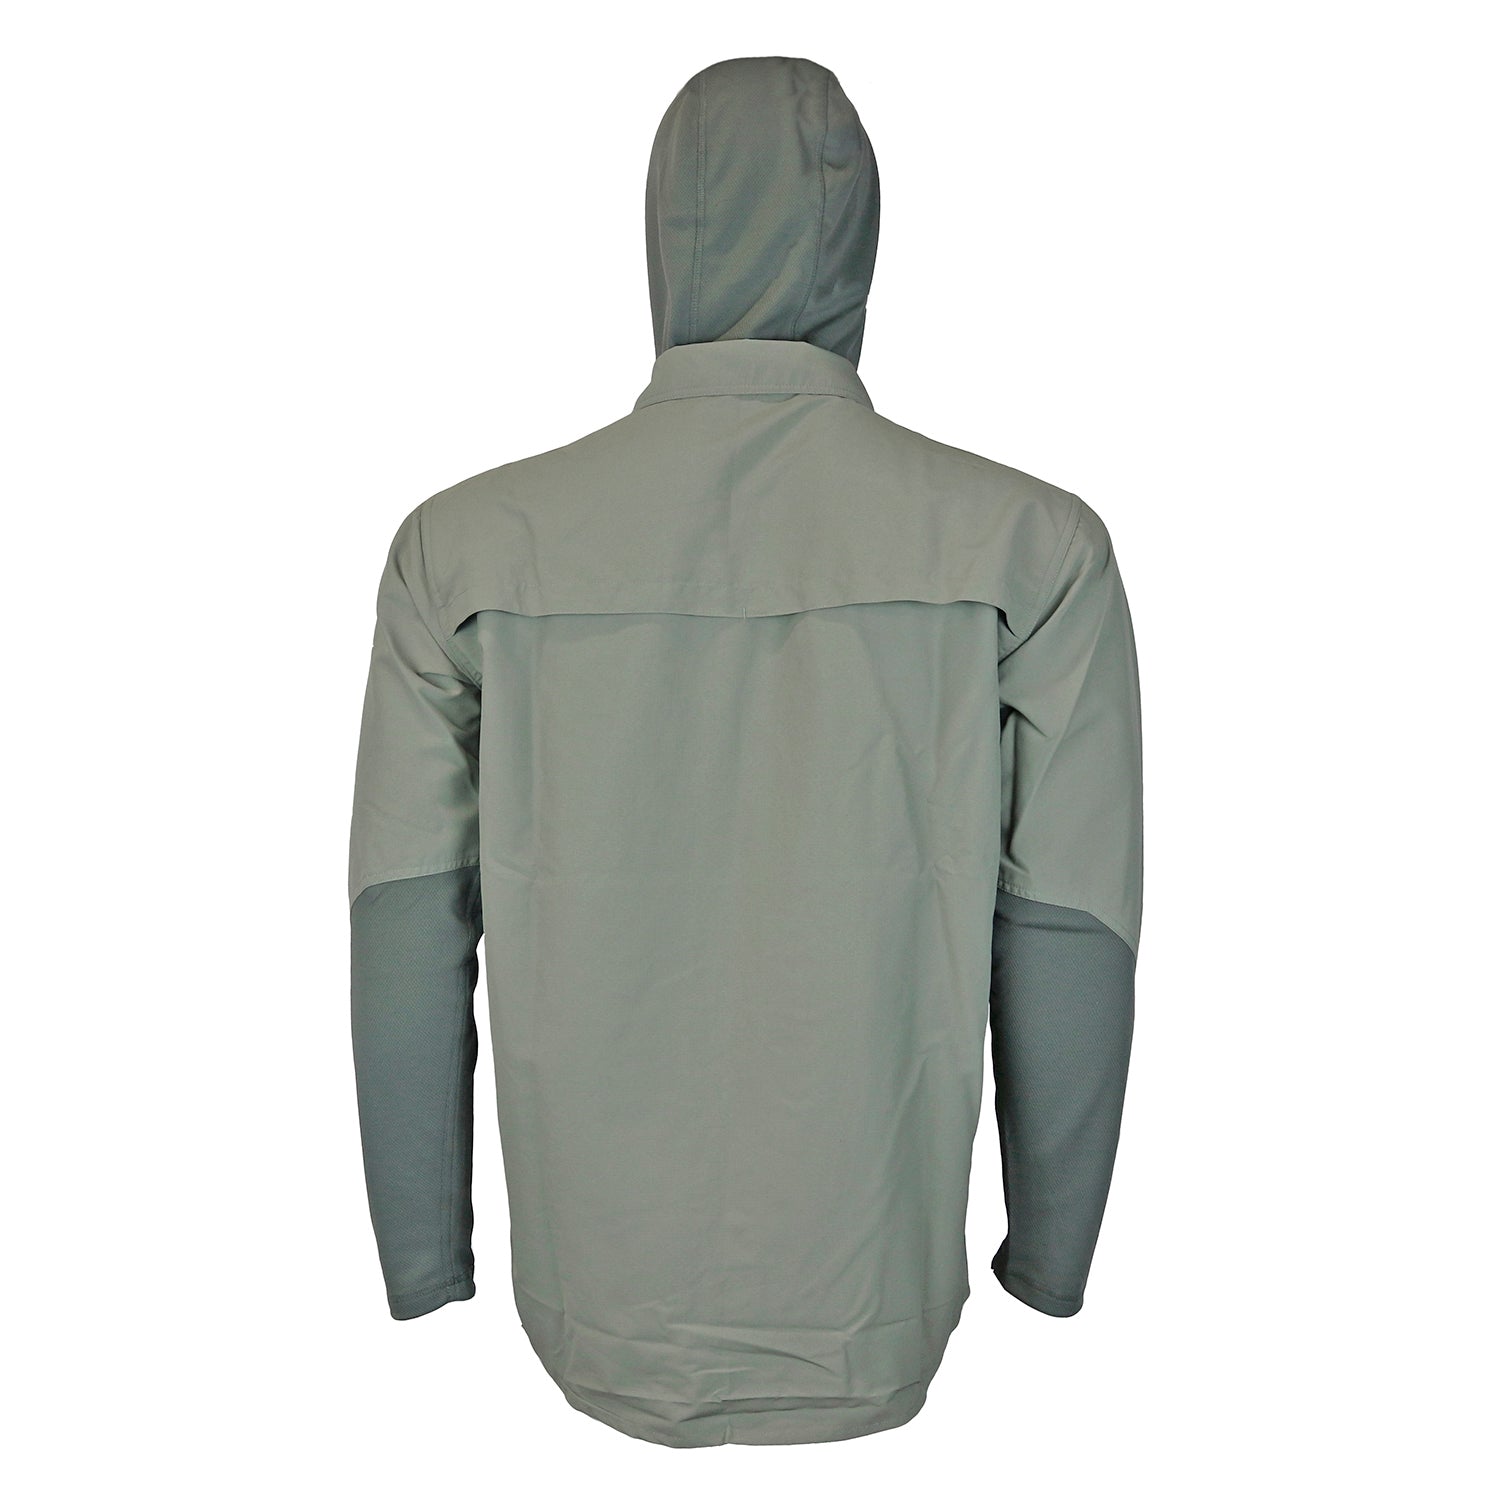 A back view of a sage green shirt with crew sleeves, a collar and a hood up.